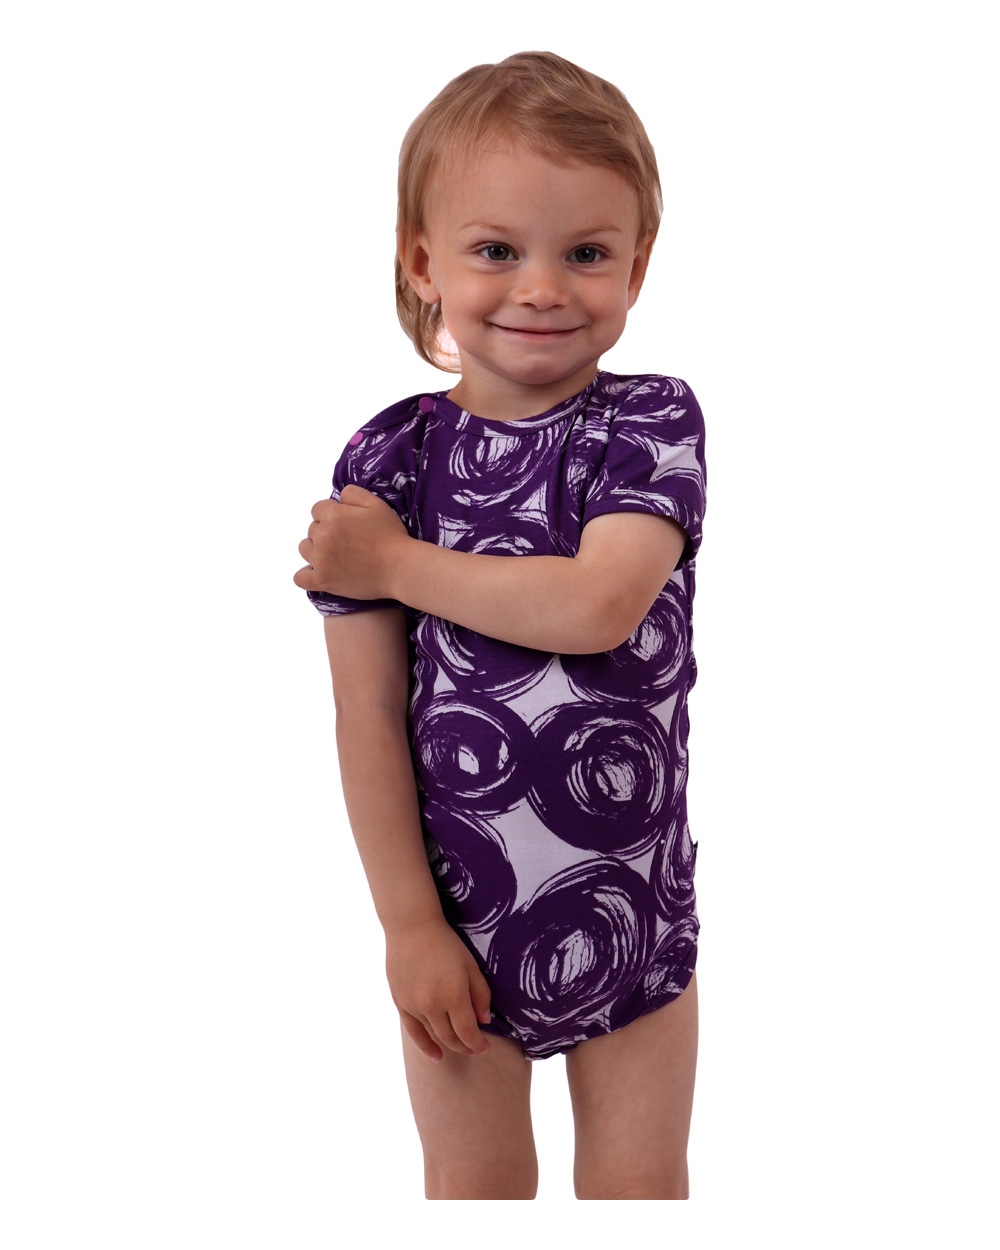 Baby cotton onesies with short sleeves, purple patterned